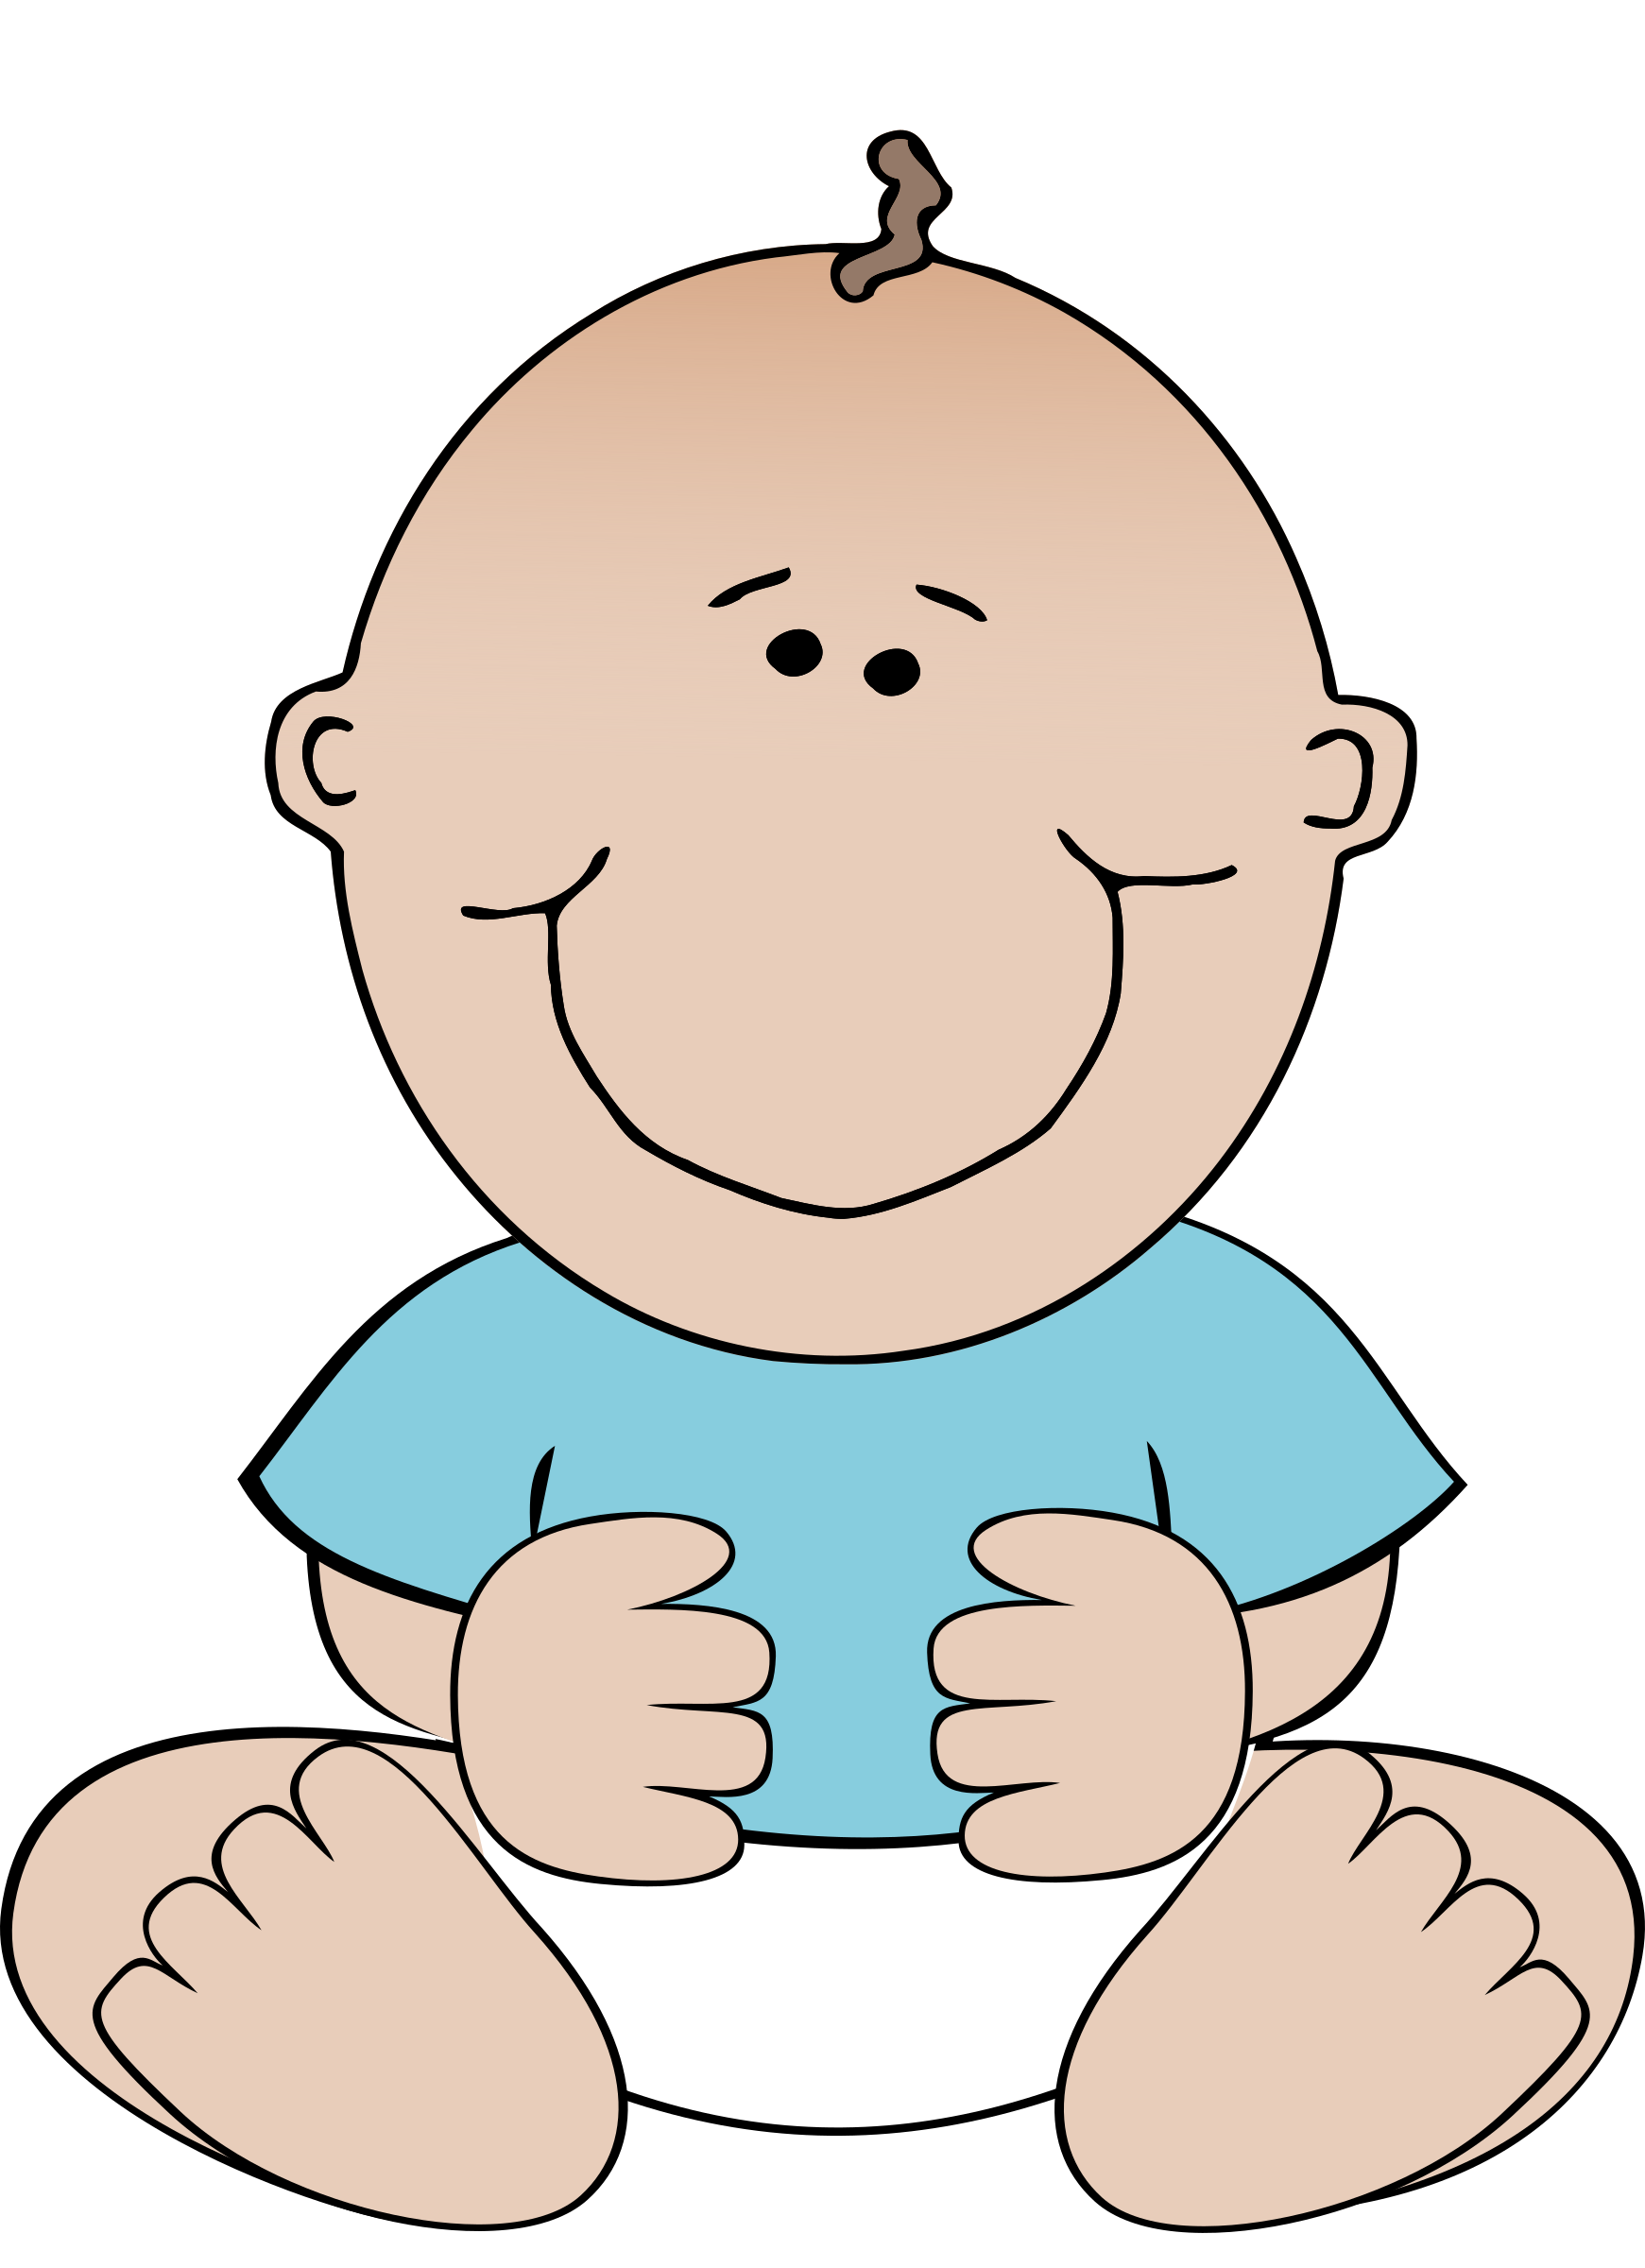 Download Baby Boy Sitting Vector Clipart image - Free stock photo ...